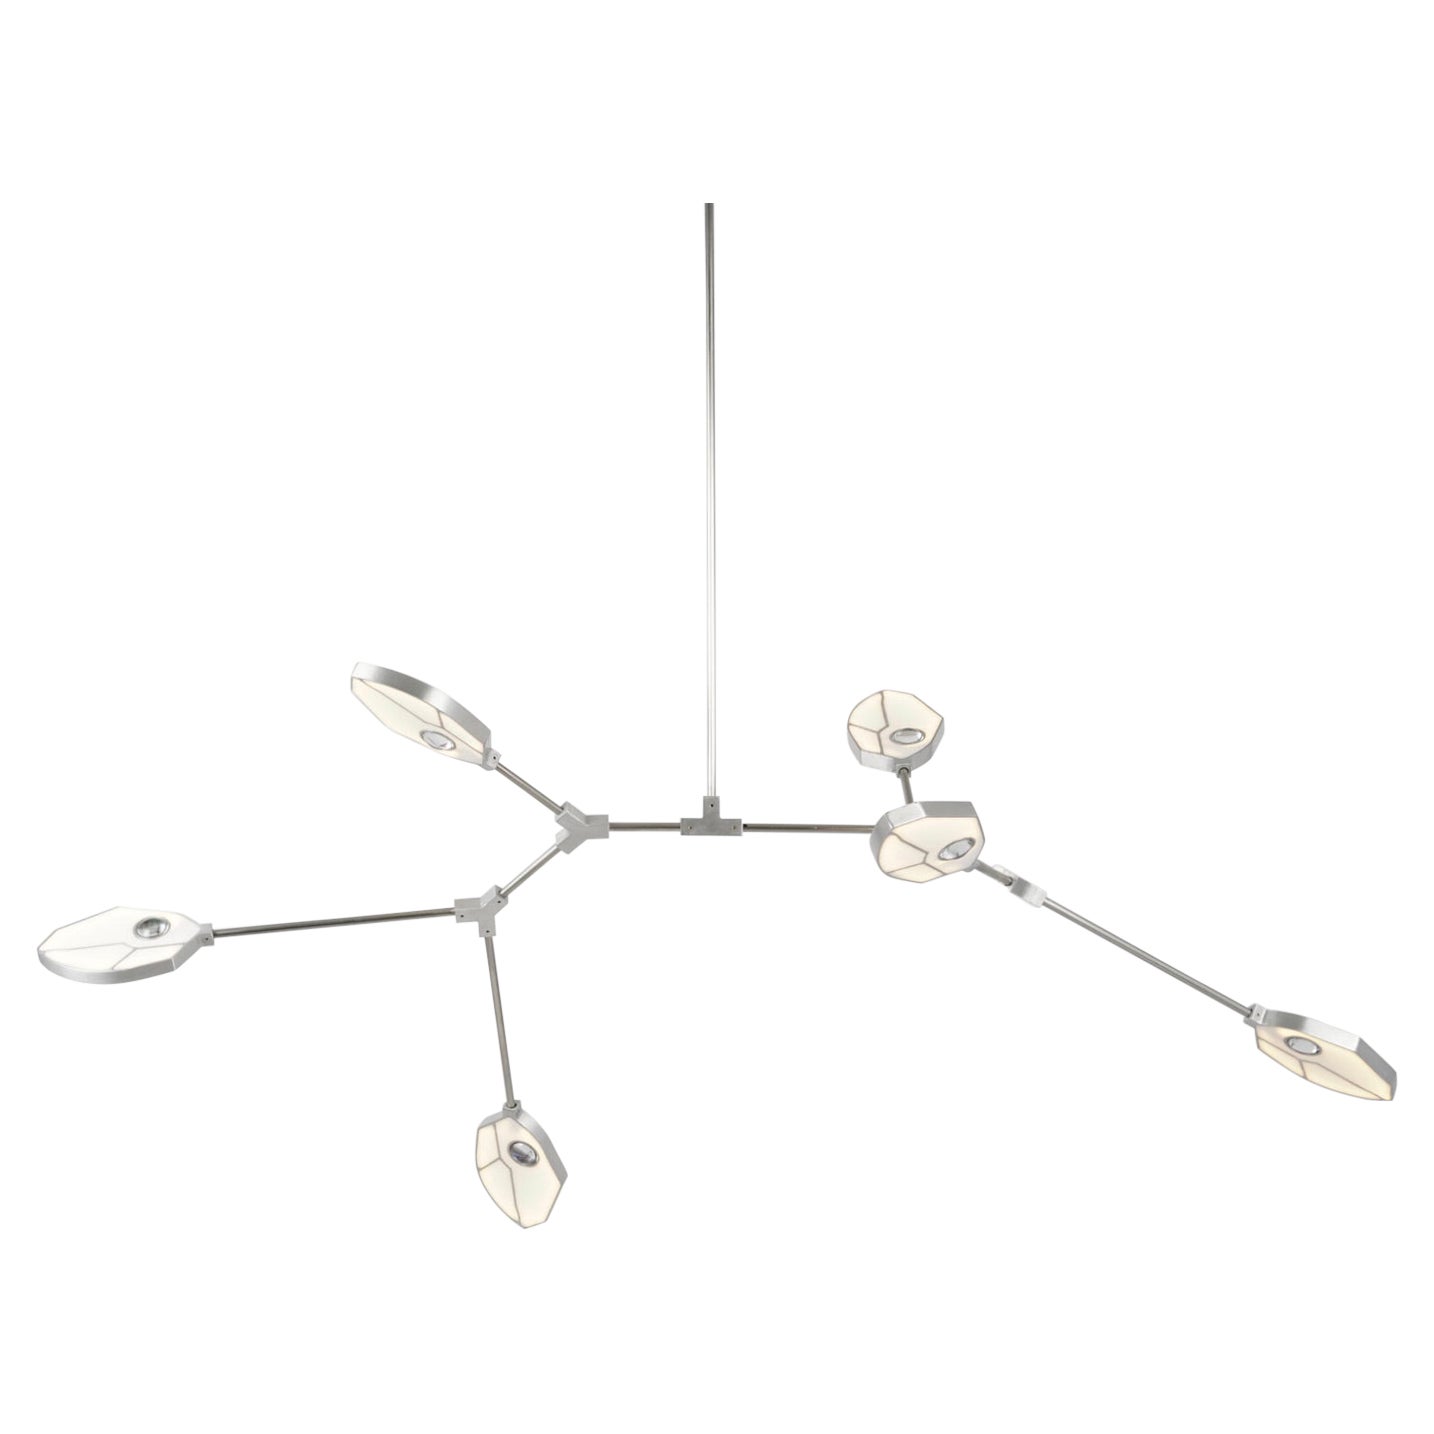 Taking inspiration from the necessity of light for life, the Joni range is a portrayal of photosynthesis, the process by which plants convert sunlight to food. 

Within each leaf-like LED light structure, a crystal hemisphere magnifies an